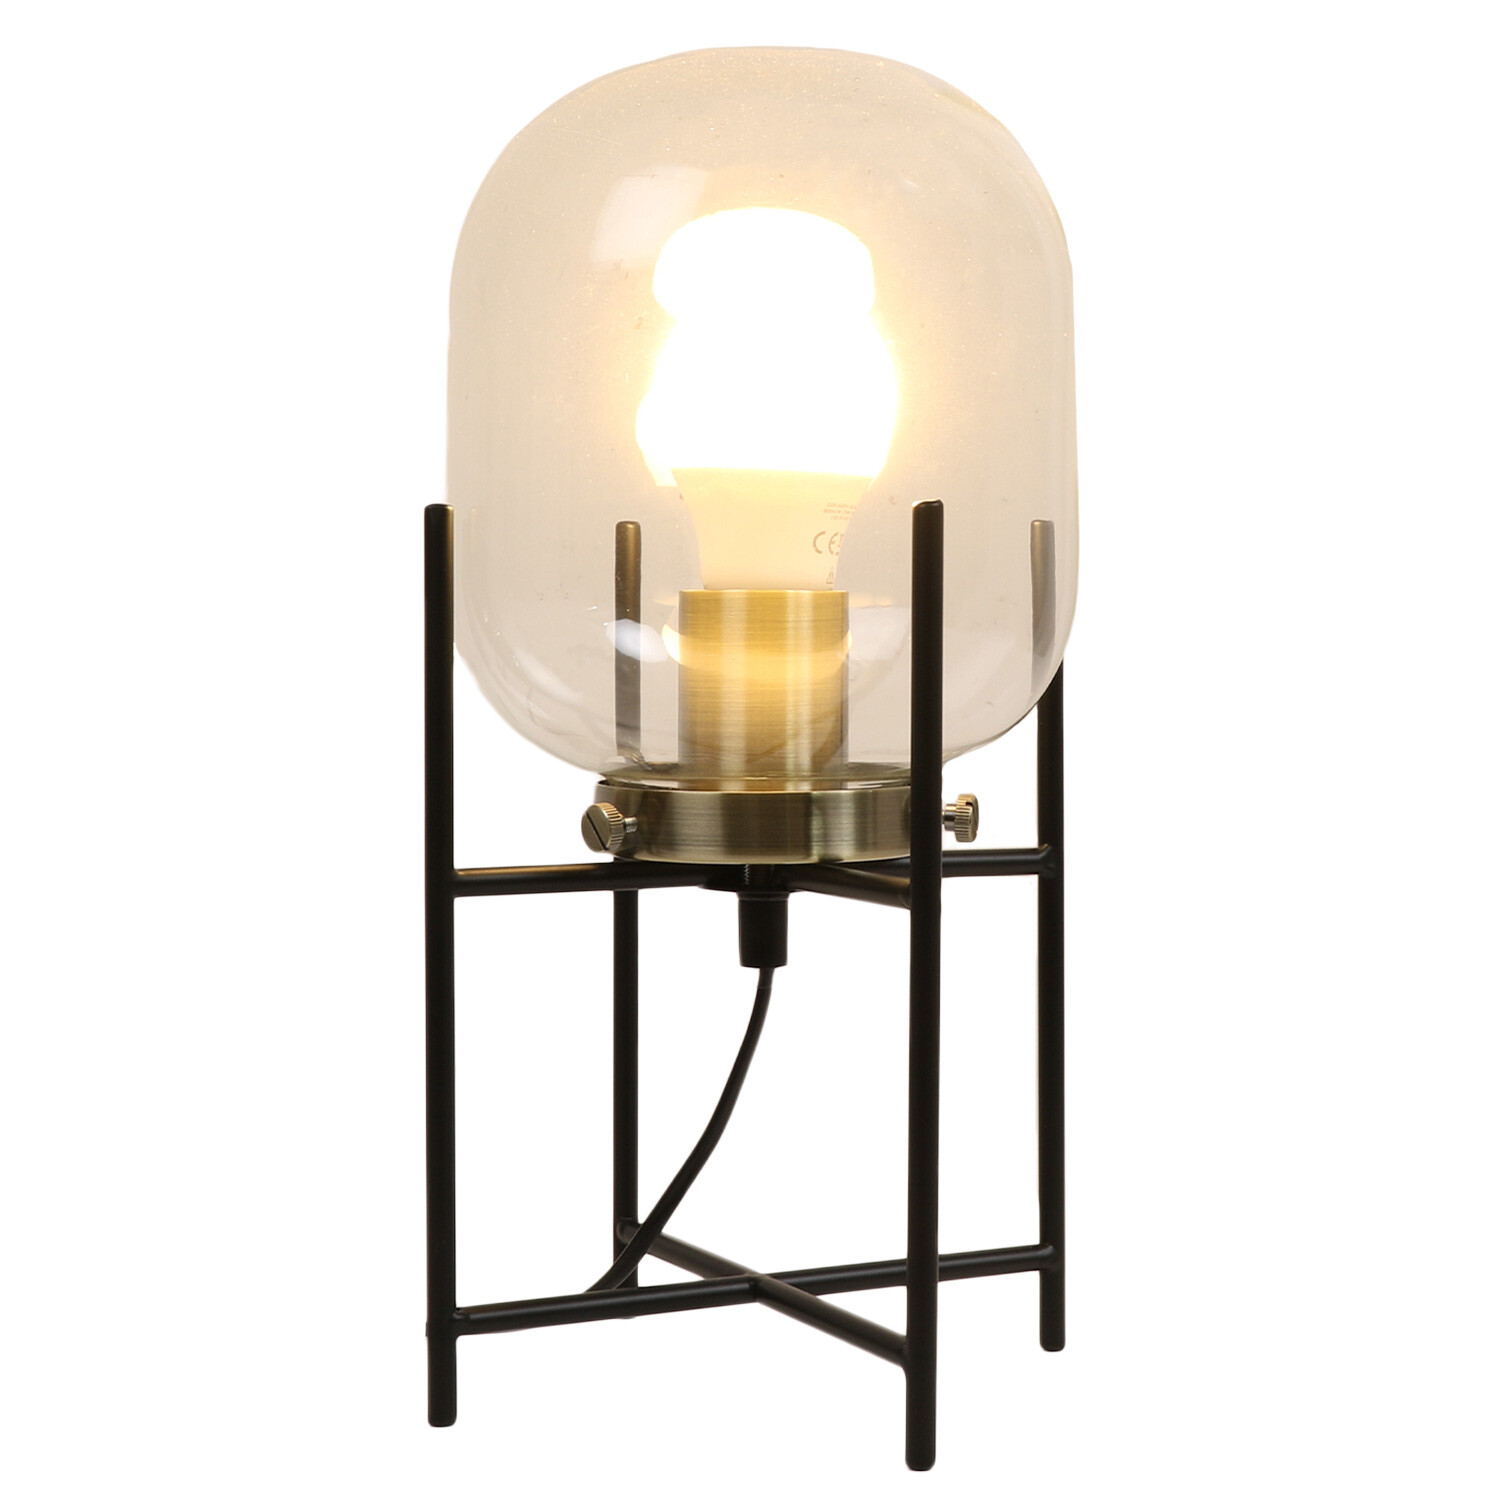 Oliver Black Glass Industrial Table Lamp Image 1